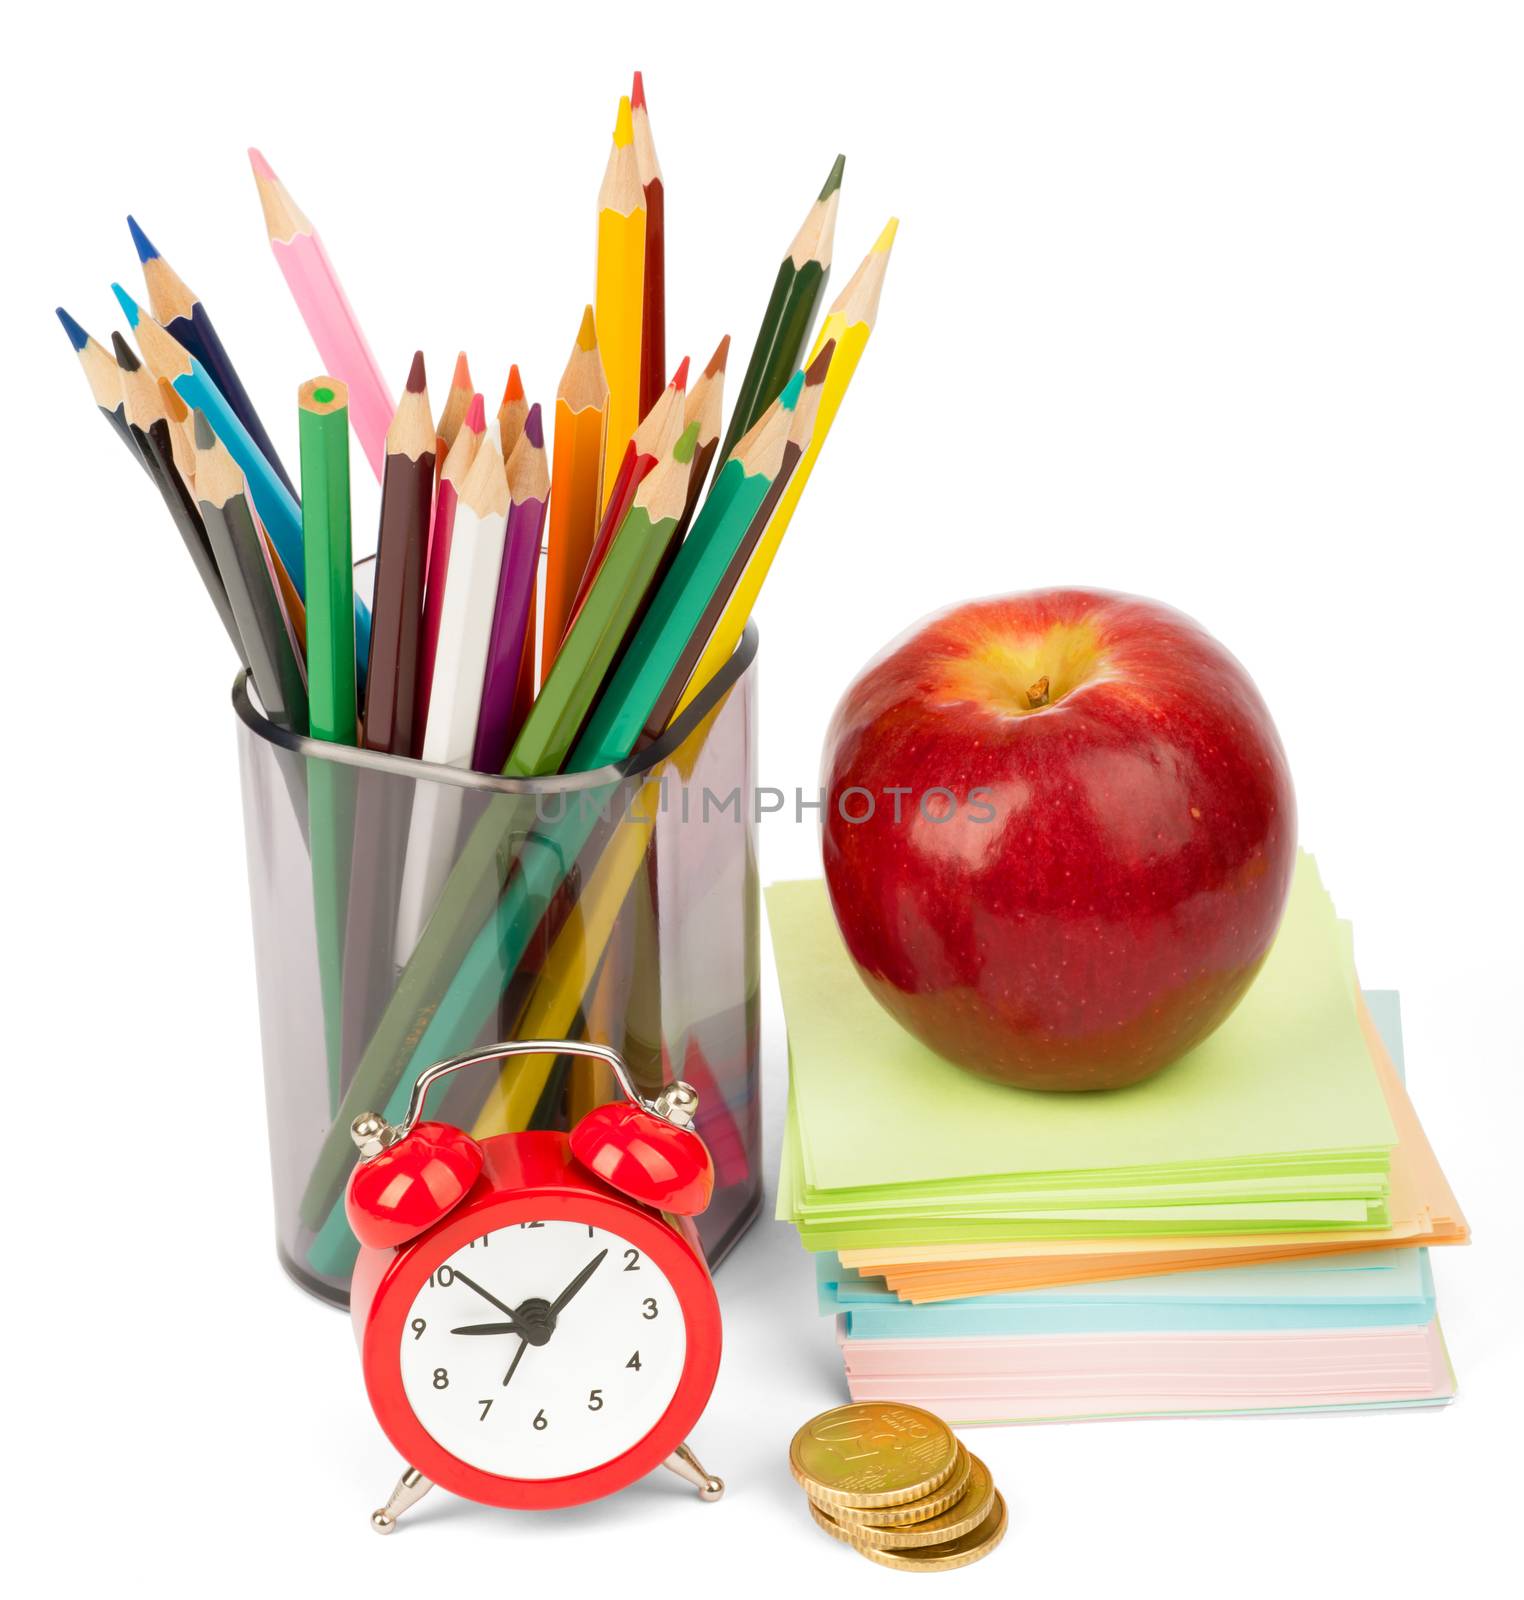 Alarm clock with red apple and crayons isolated on white background